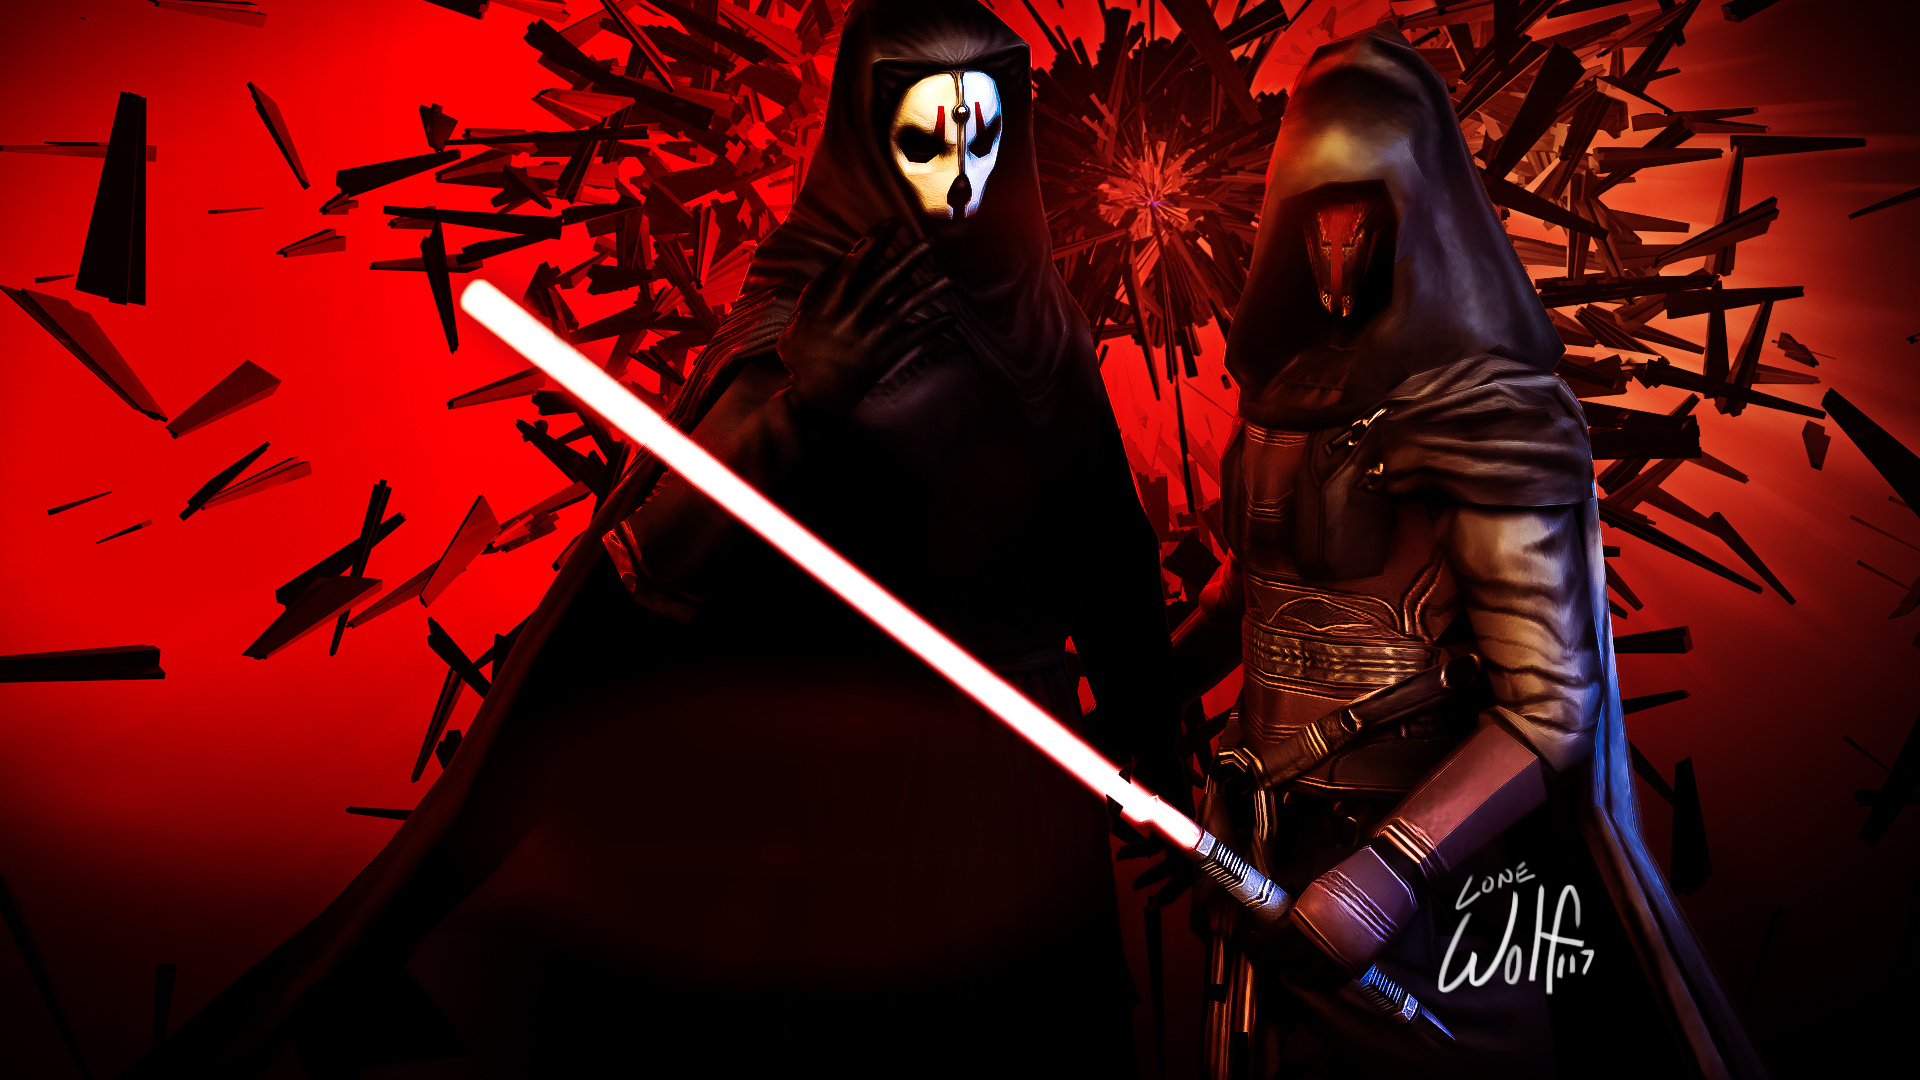 Sith Lord Wallpaper The sith lords by lonewolf117 1920x1080